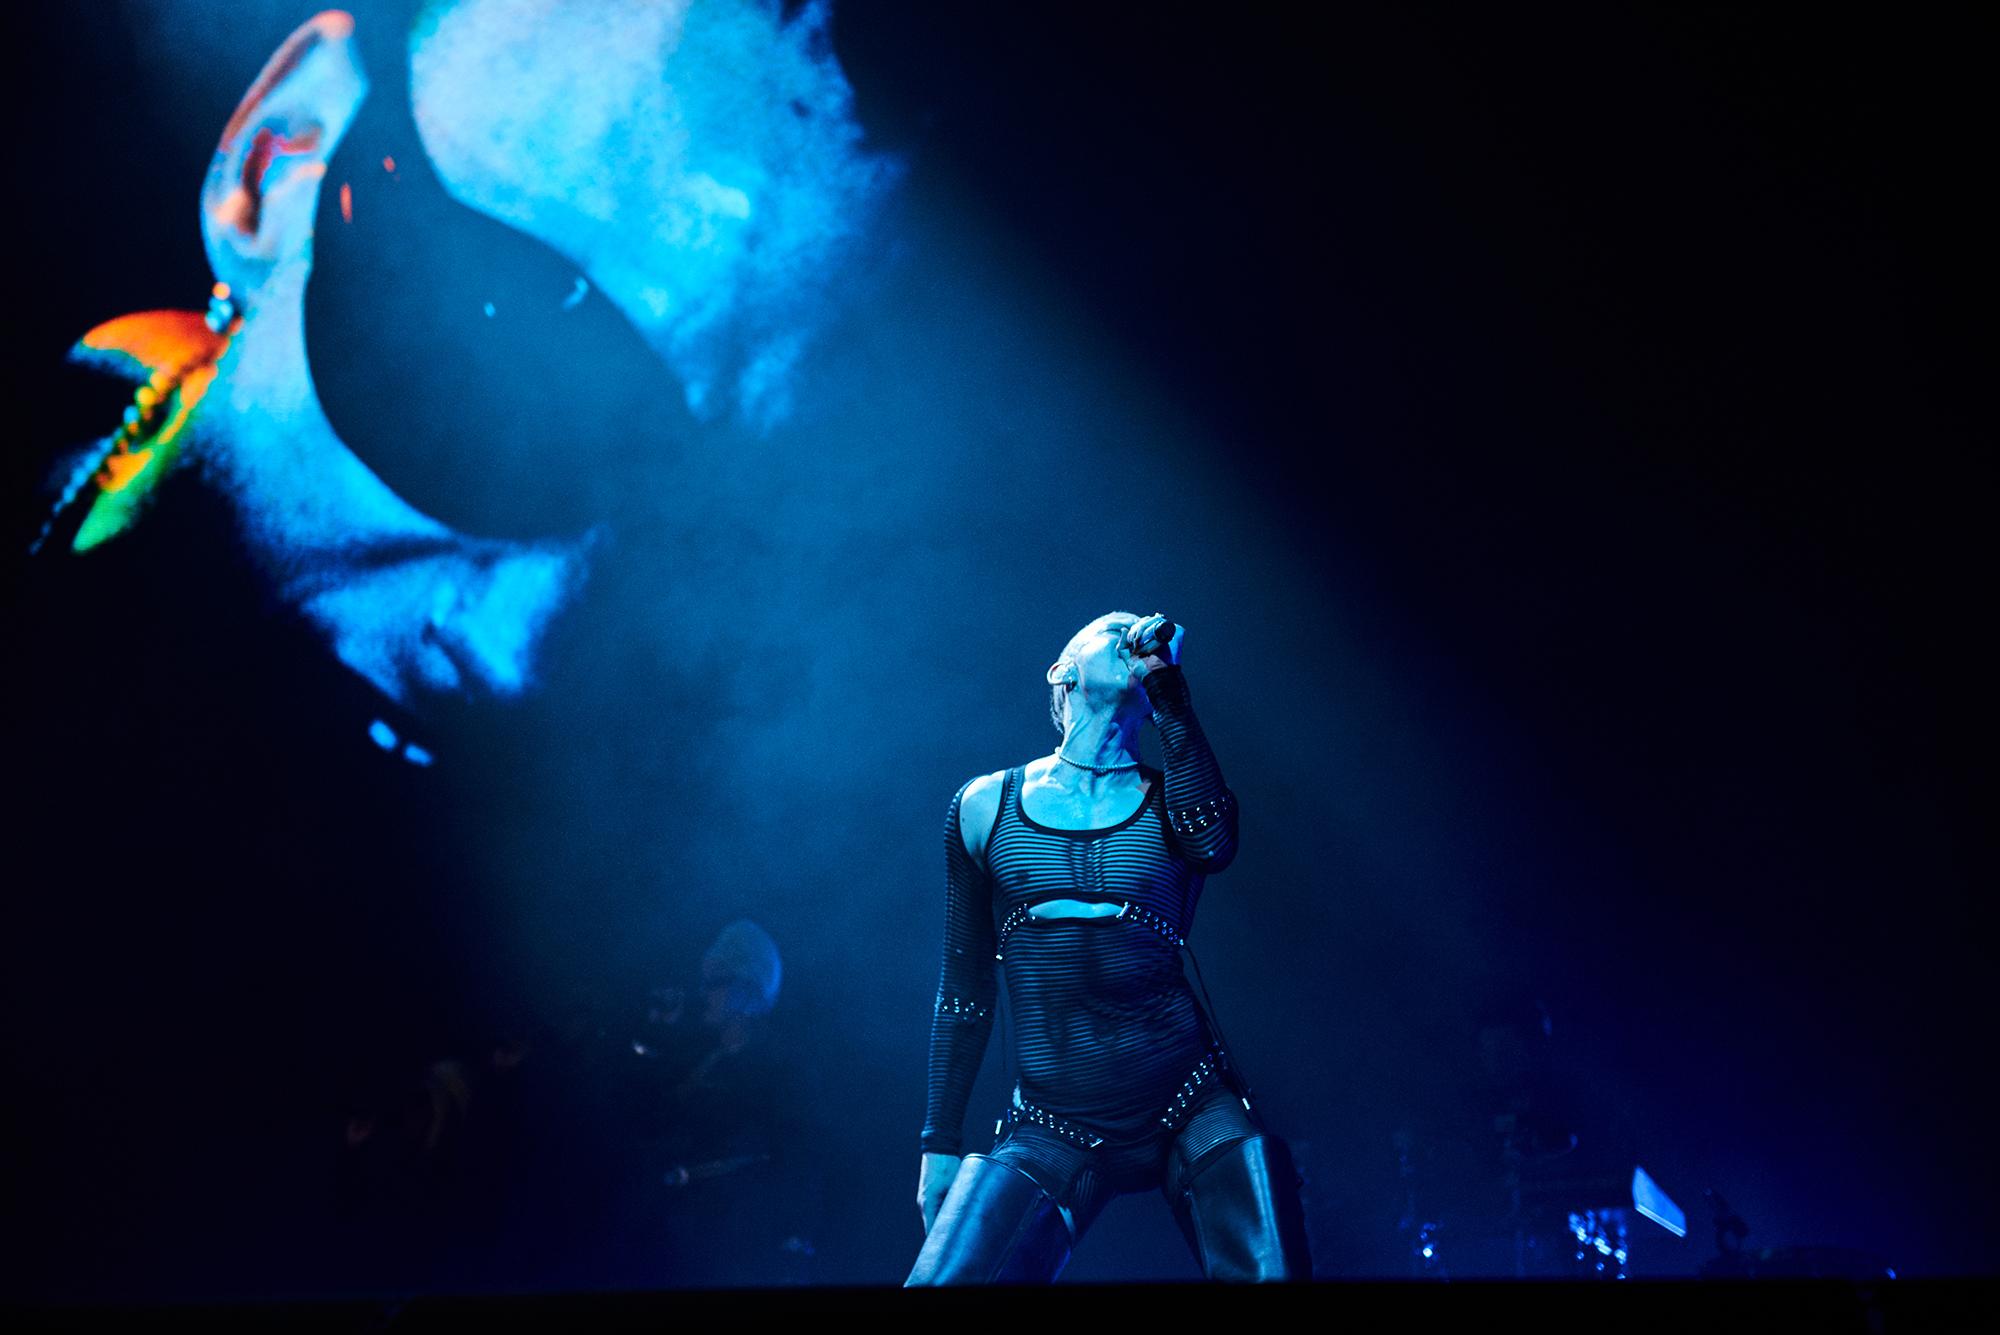 Years & Years Live image of Olly Alexander on stage under a blue spotlight taken during their live stream show recorded at OVO Arena London Years & Years